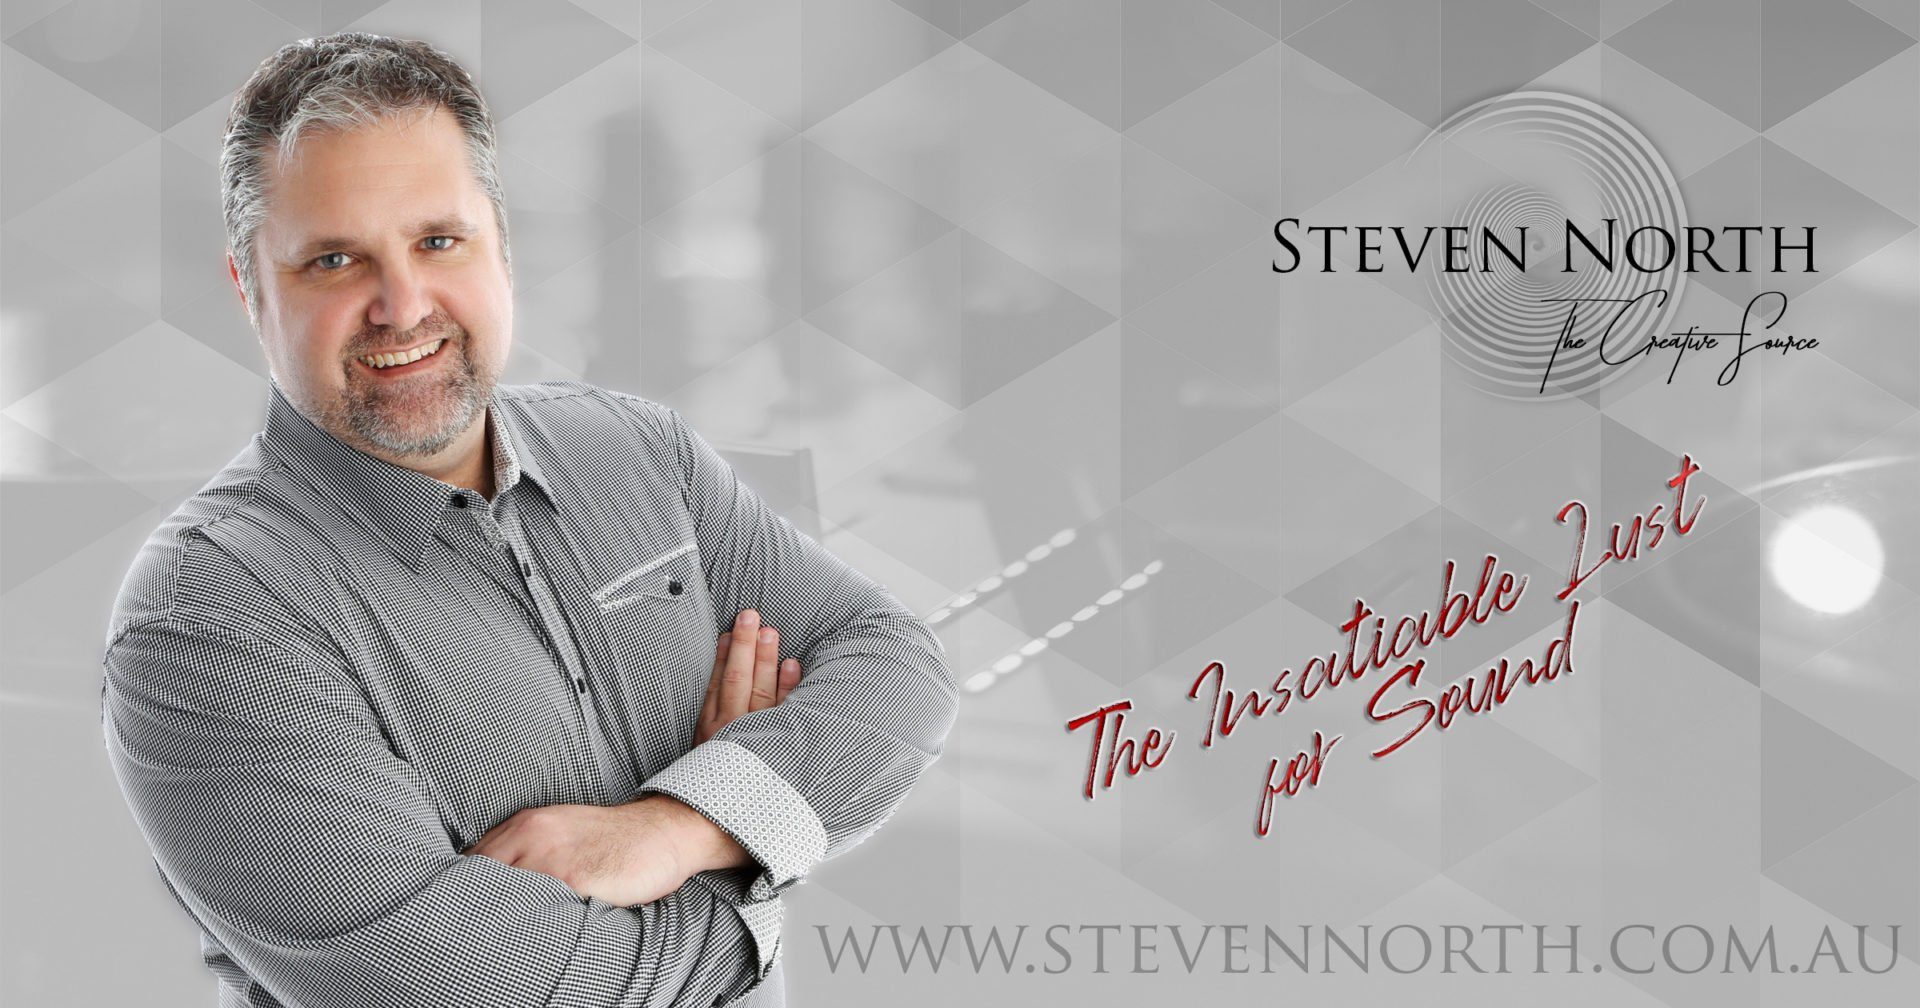 The Insatiable Lust For Sound With Steven North